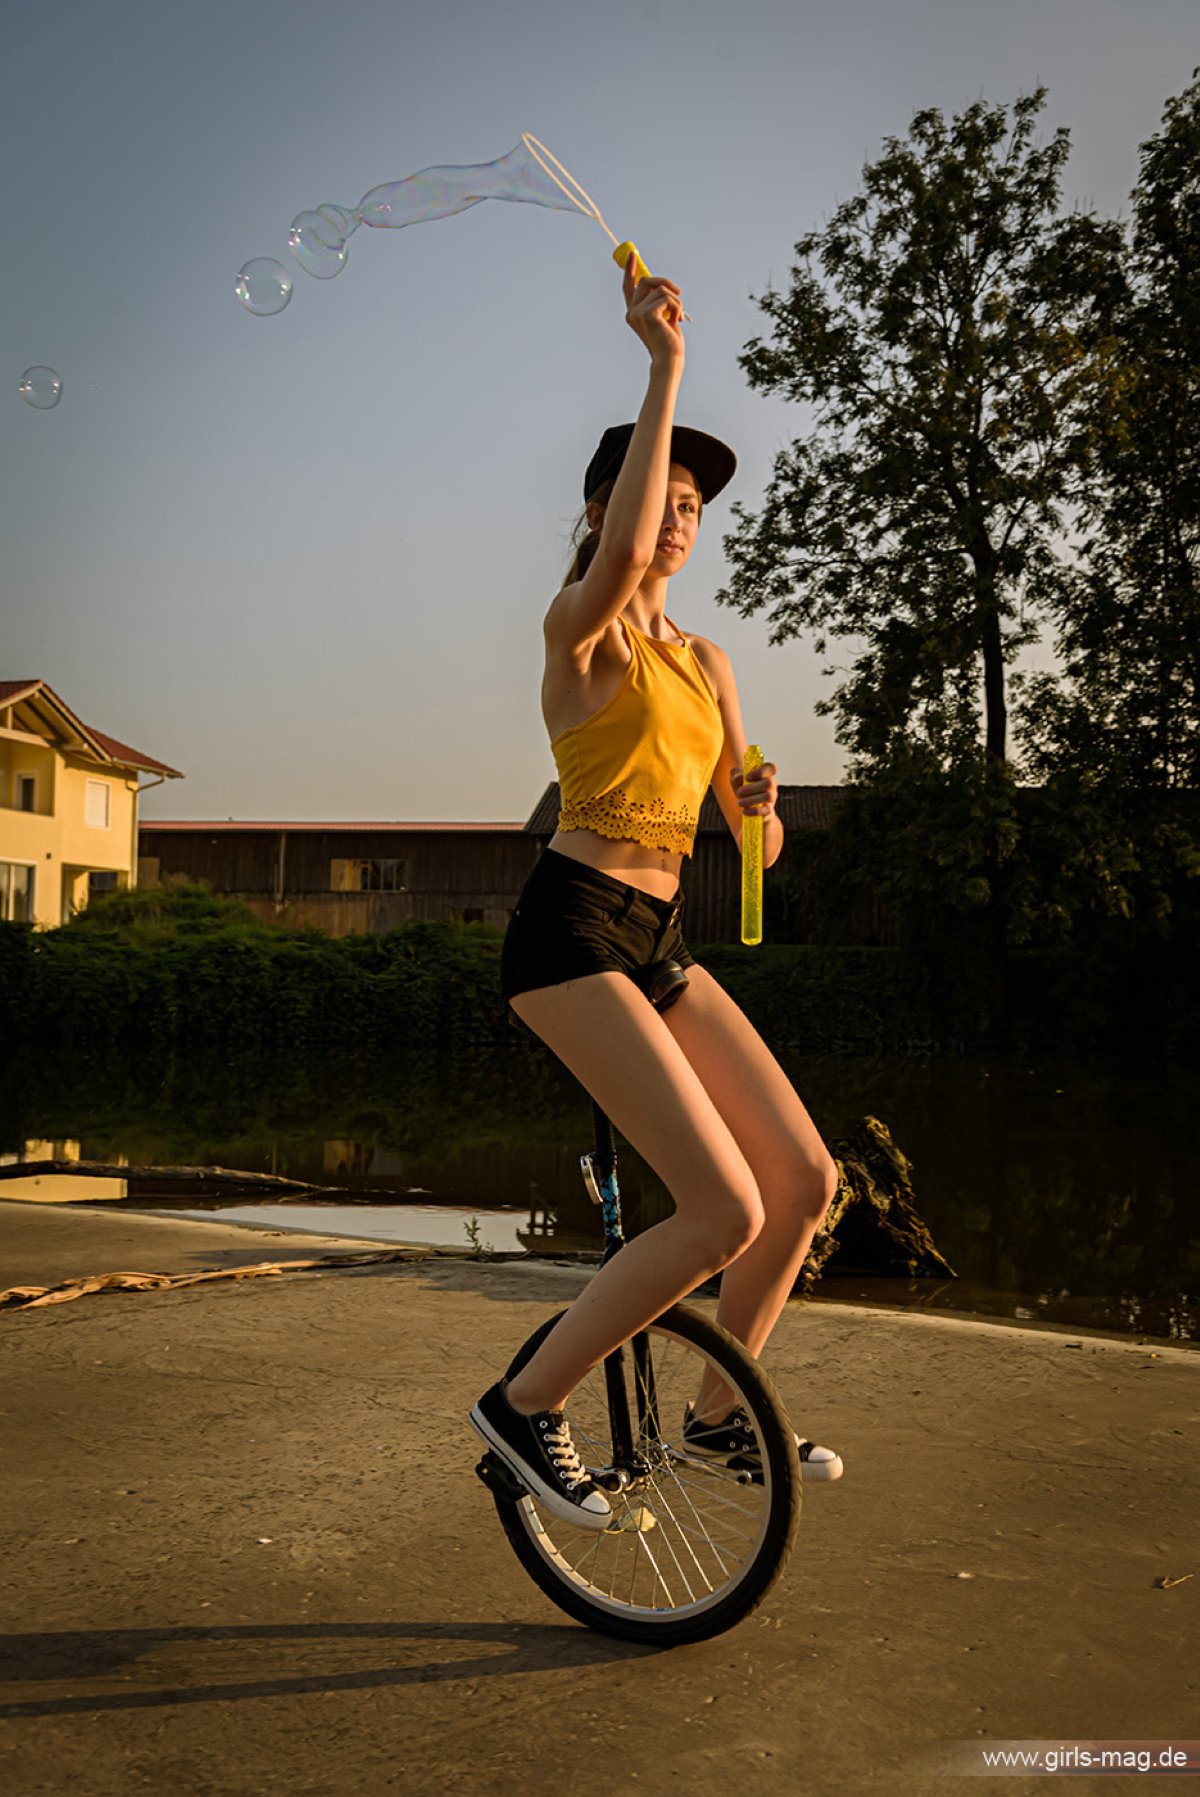 Girls Mag Annika Bubbles on a Unicycle 0114 7599576347.jpg